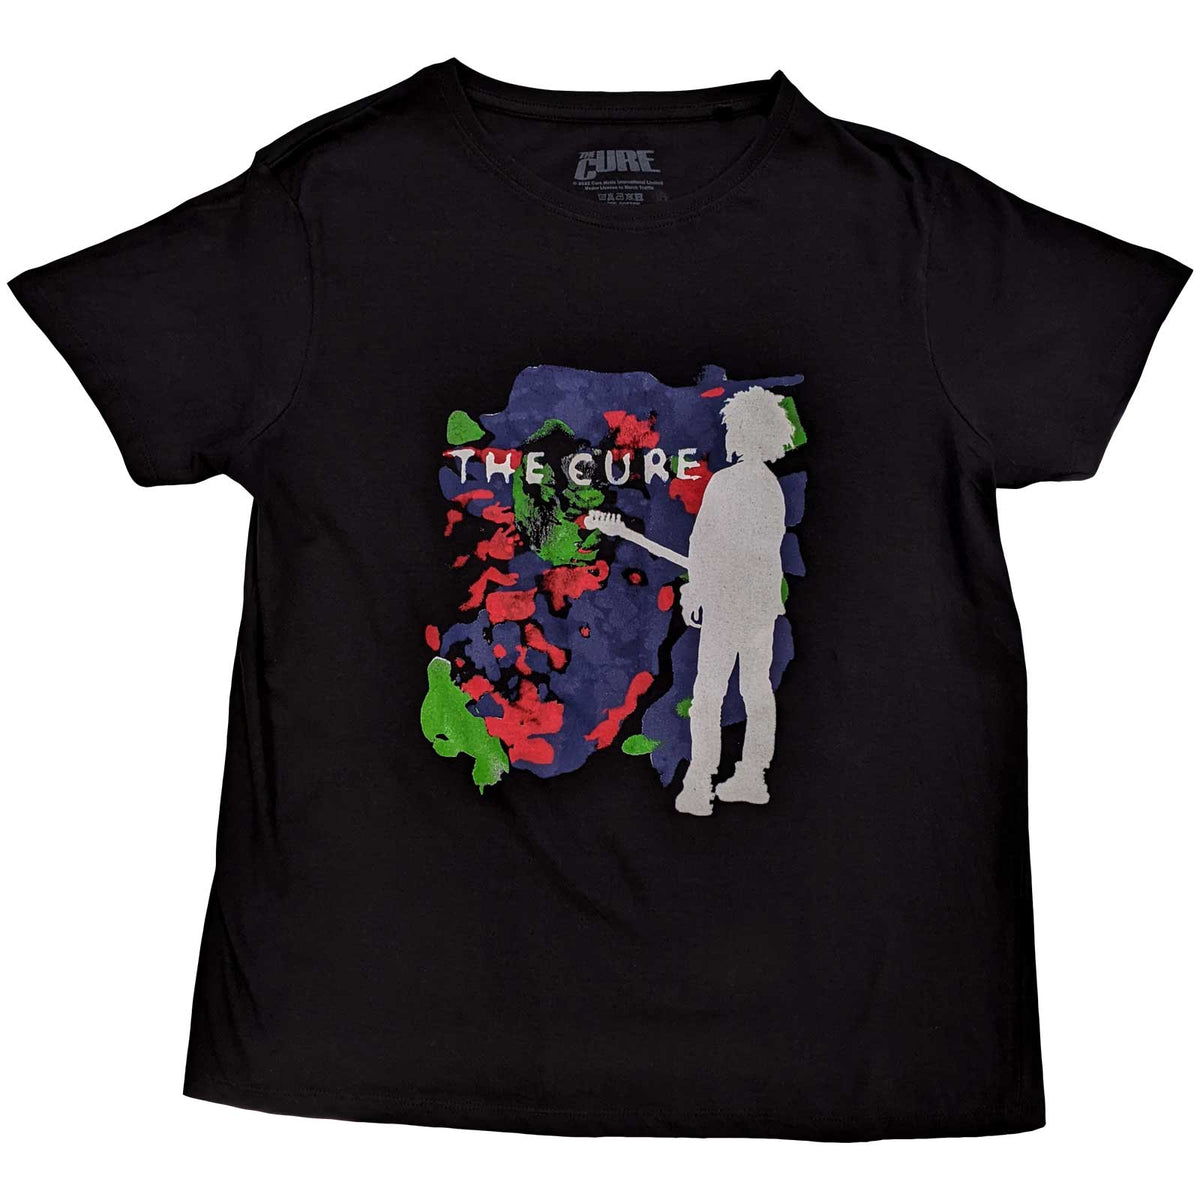 The Cure Ladies T-Shirt - Boys Don't Cry Colour - Official Licensed Product